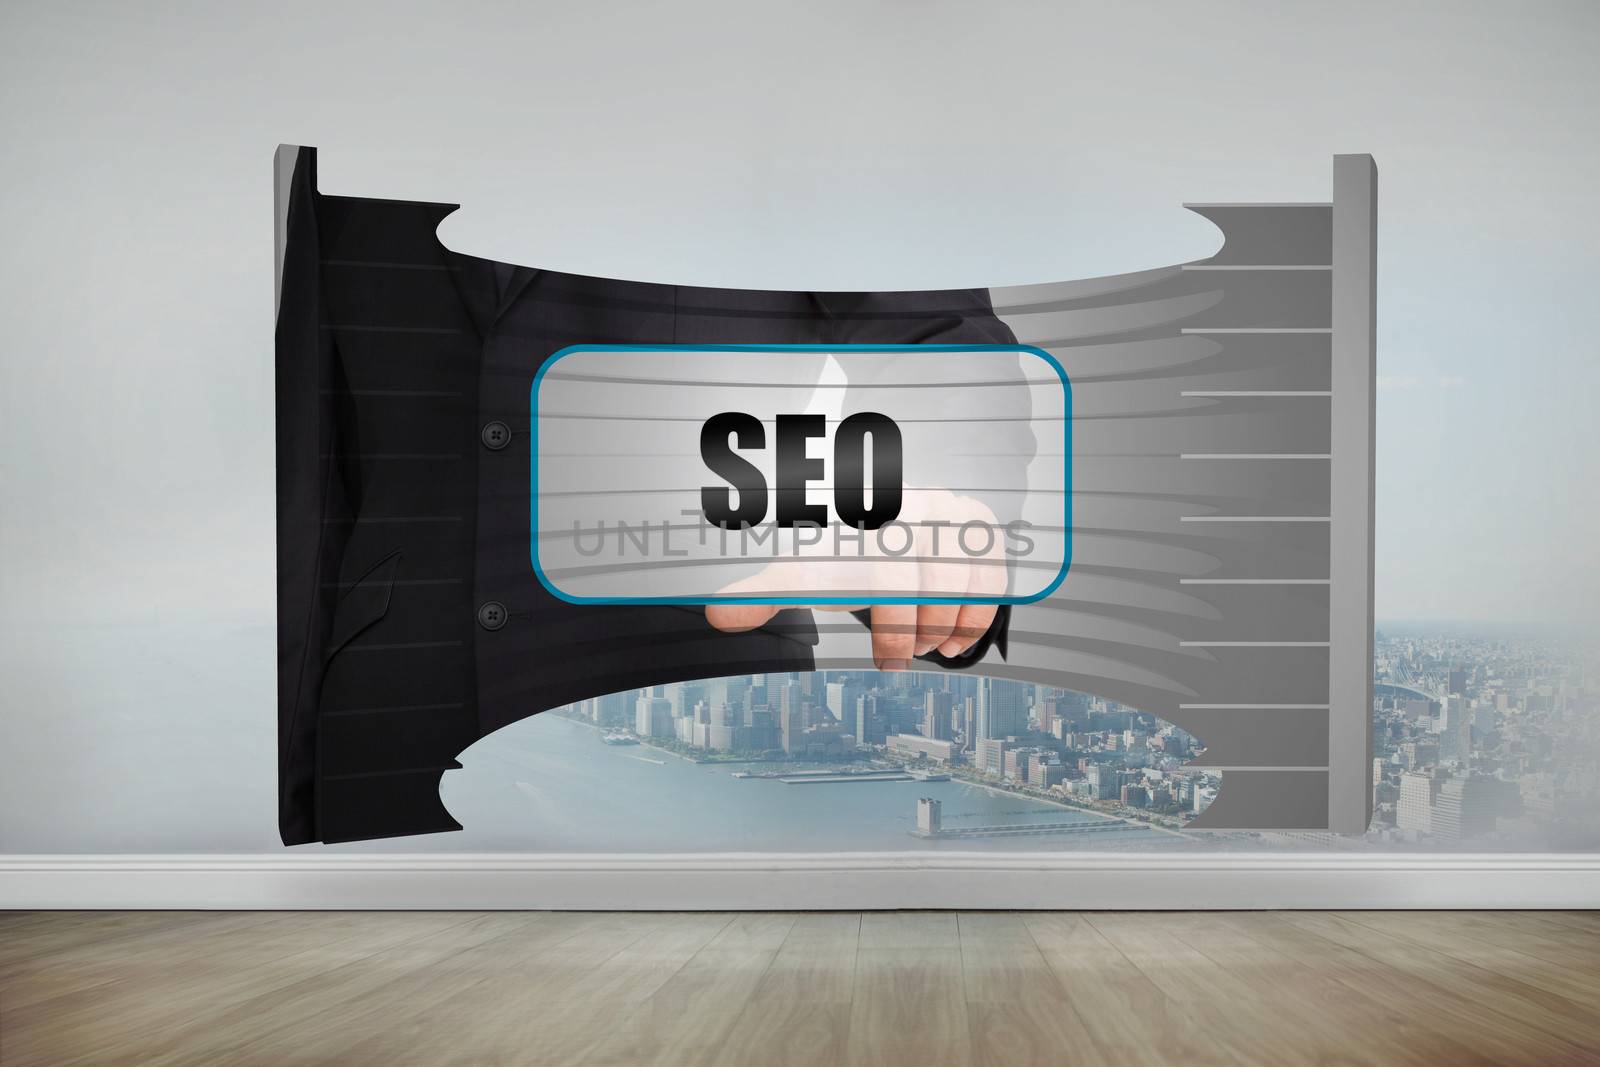 Seo banner on abstract screen against city scene in a room